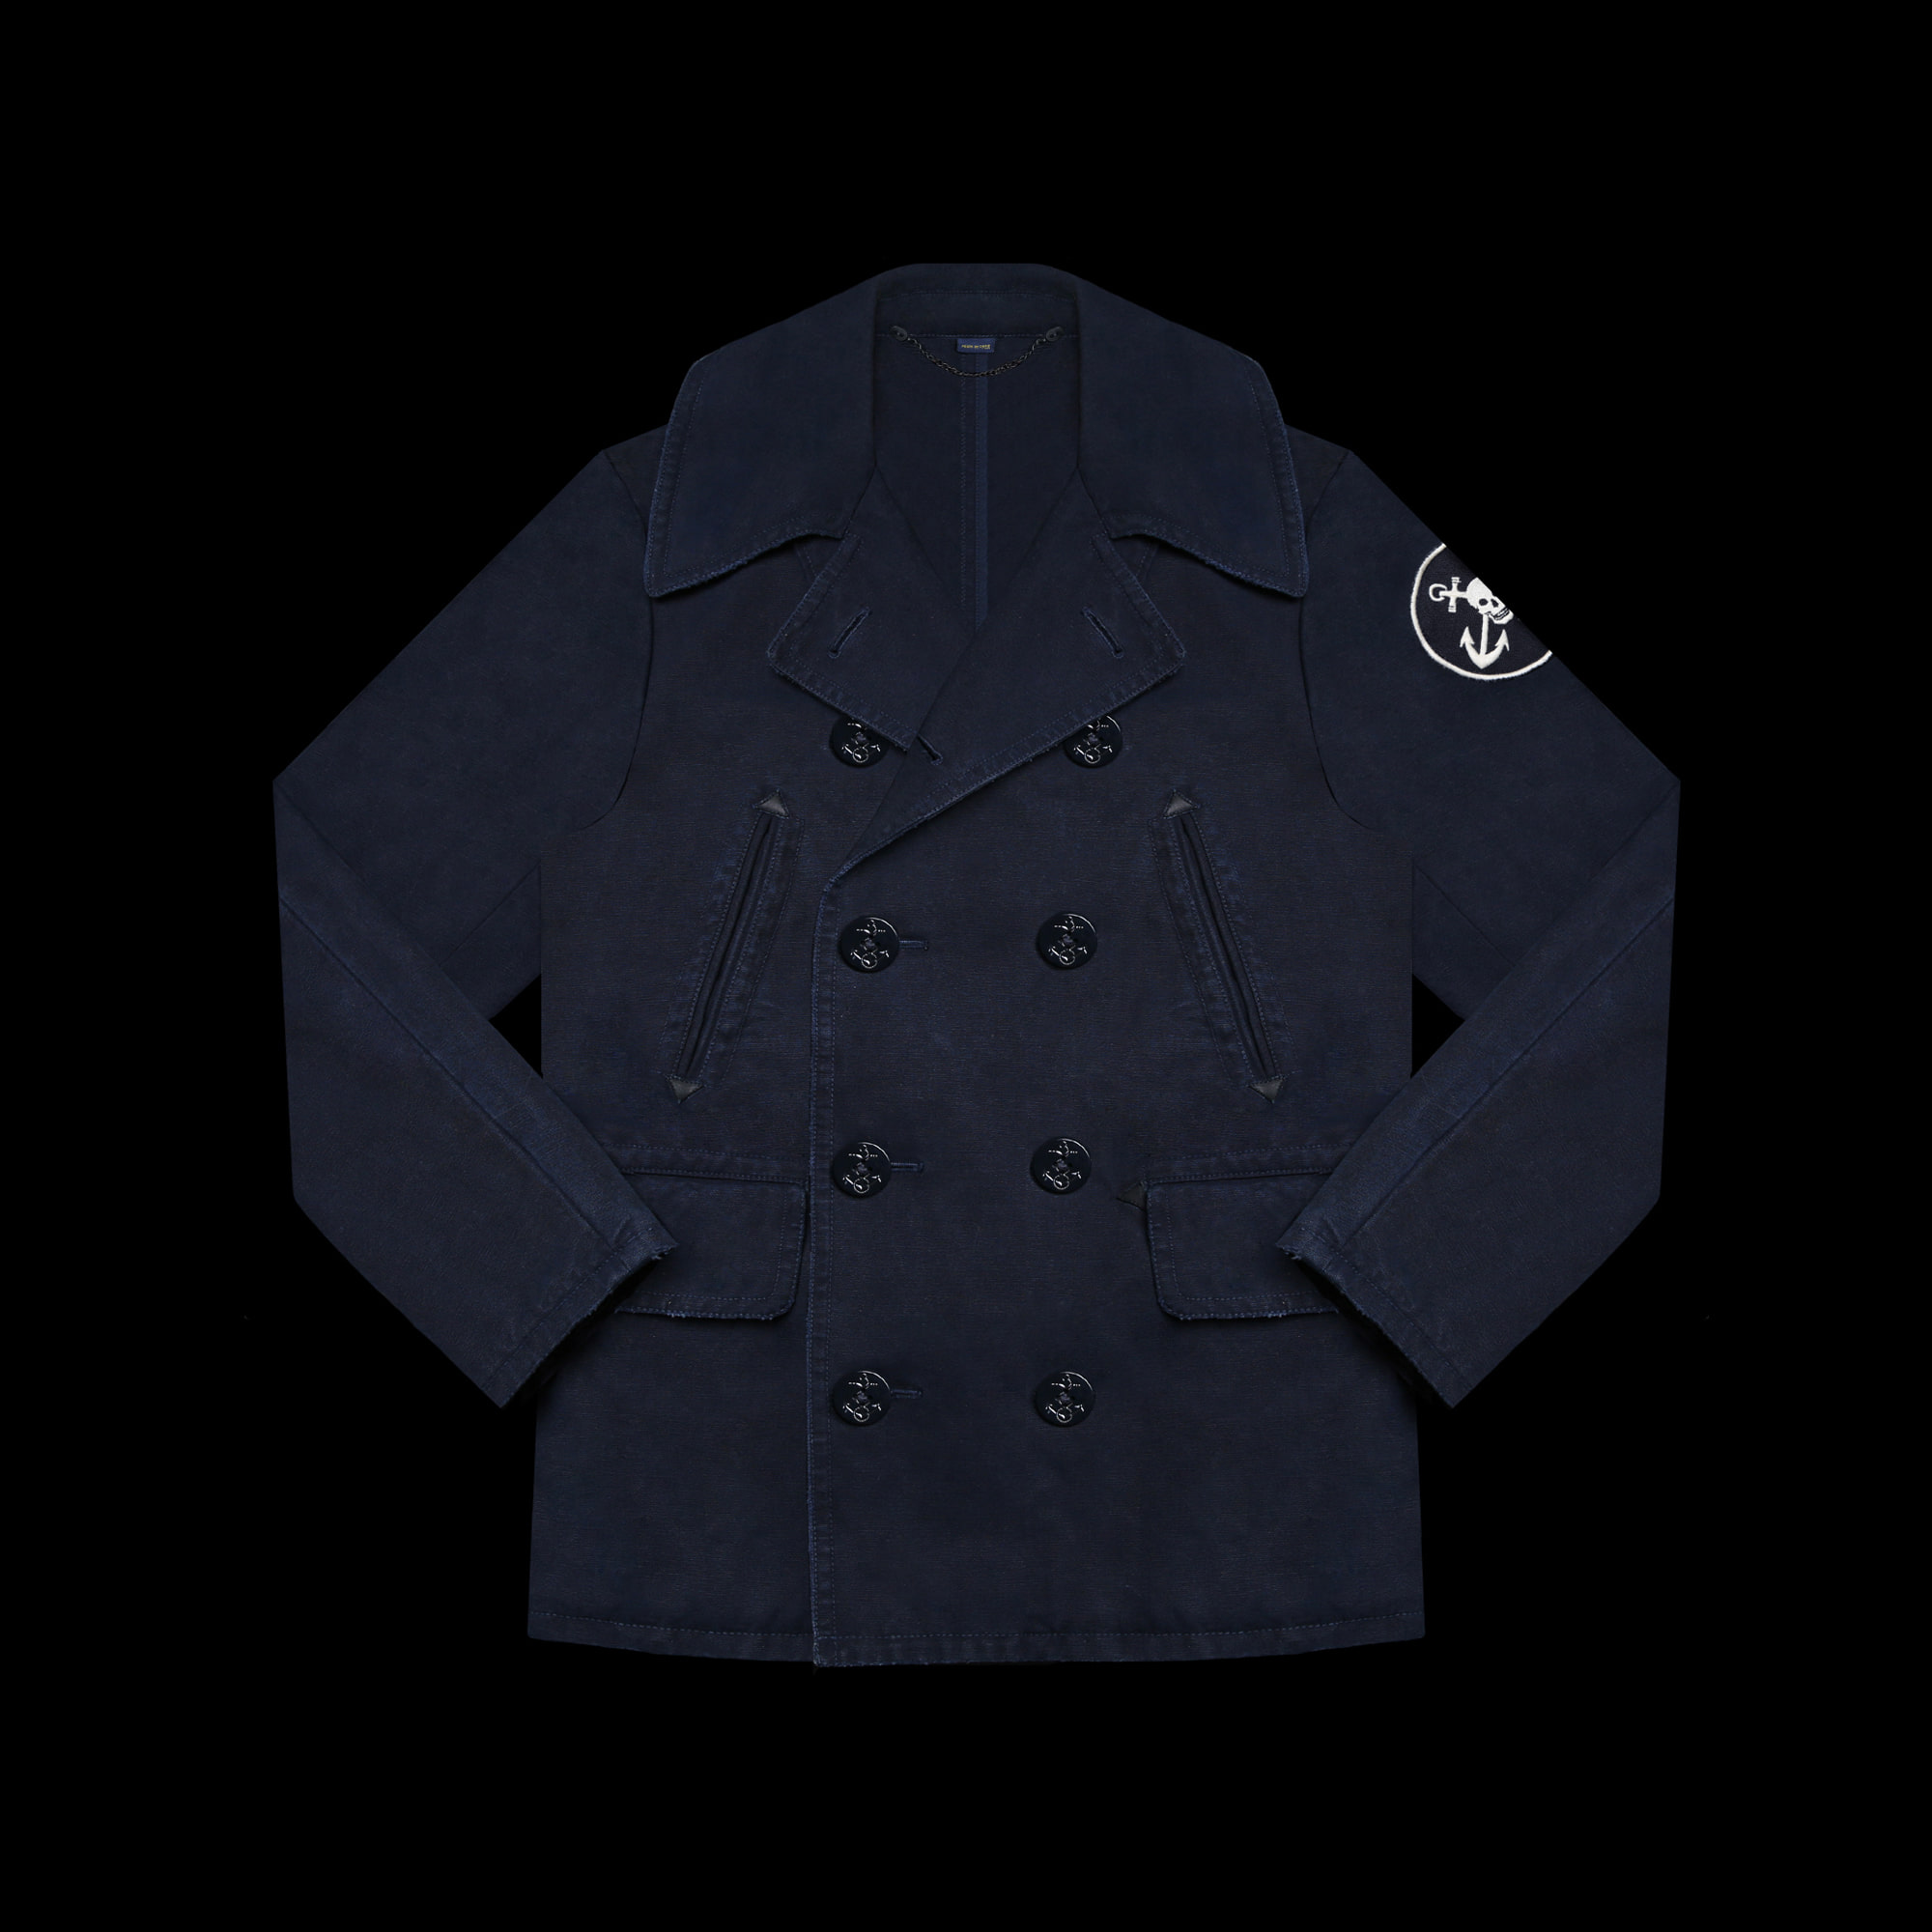 RUGBYCOTTON MILITARY PEACOAT